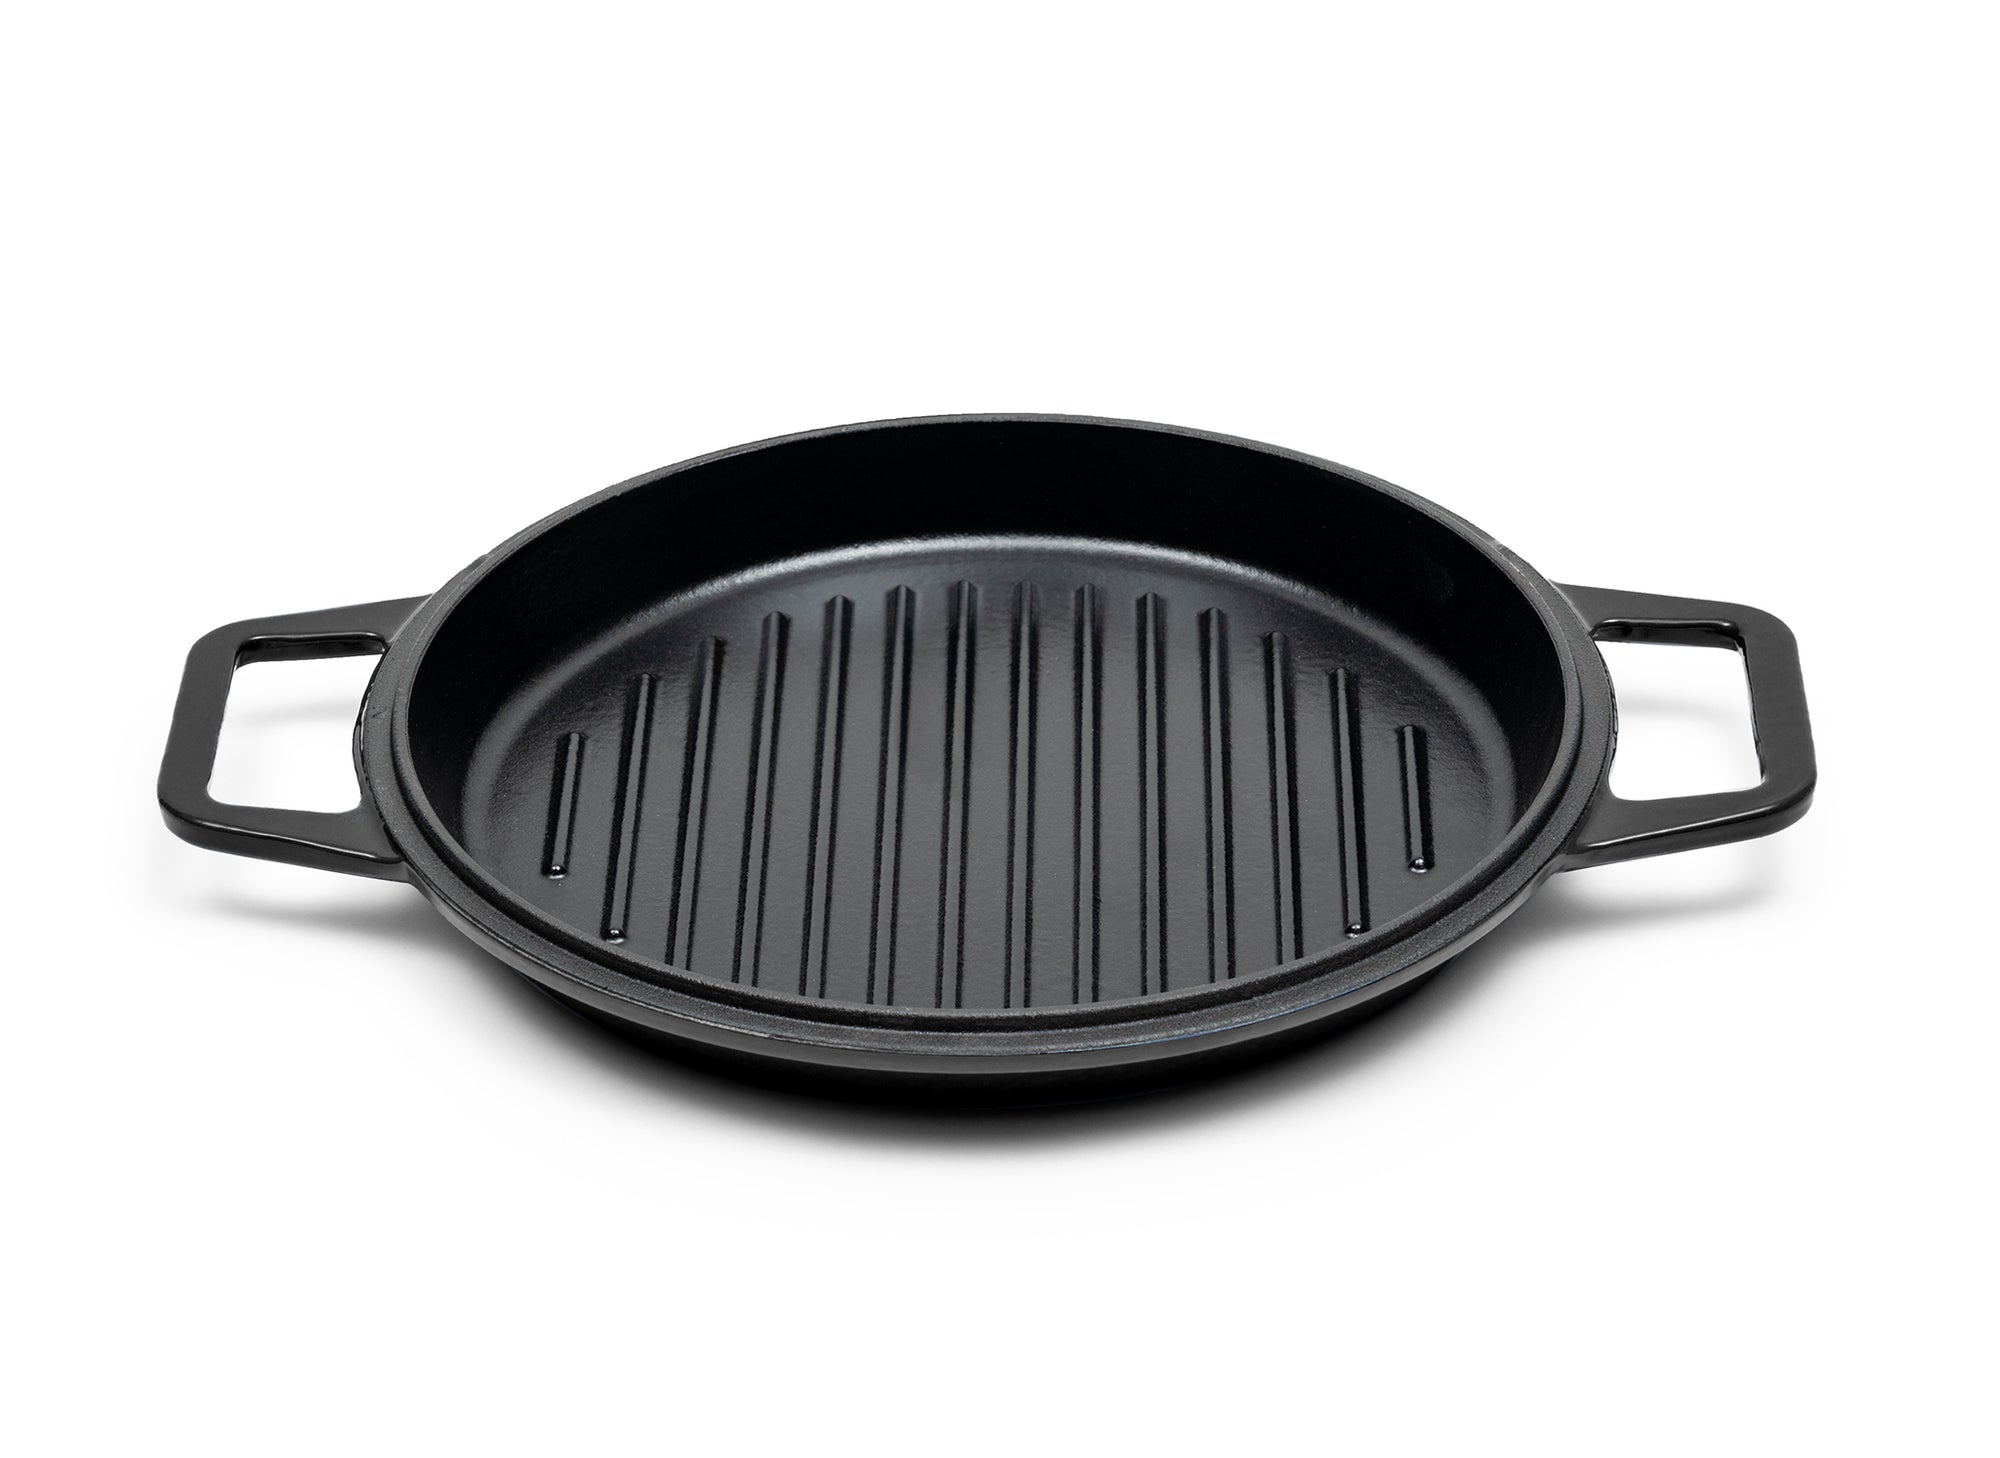 Black Grill Lid for 7-quart Dutch oven face up on white background, showing black enamel interior with raised grill lines.